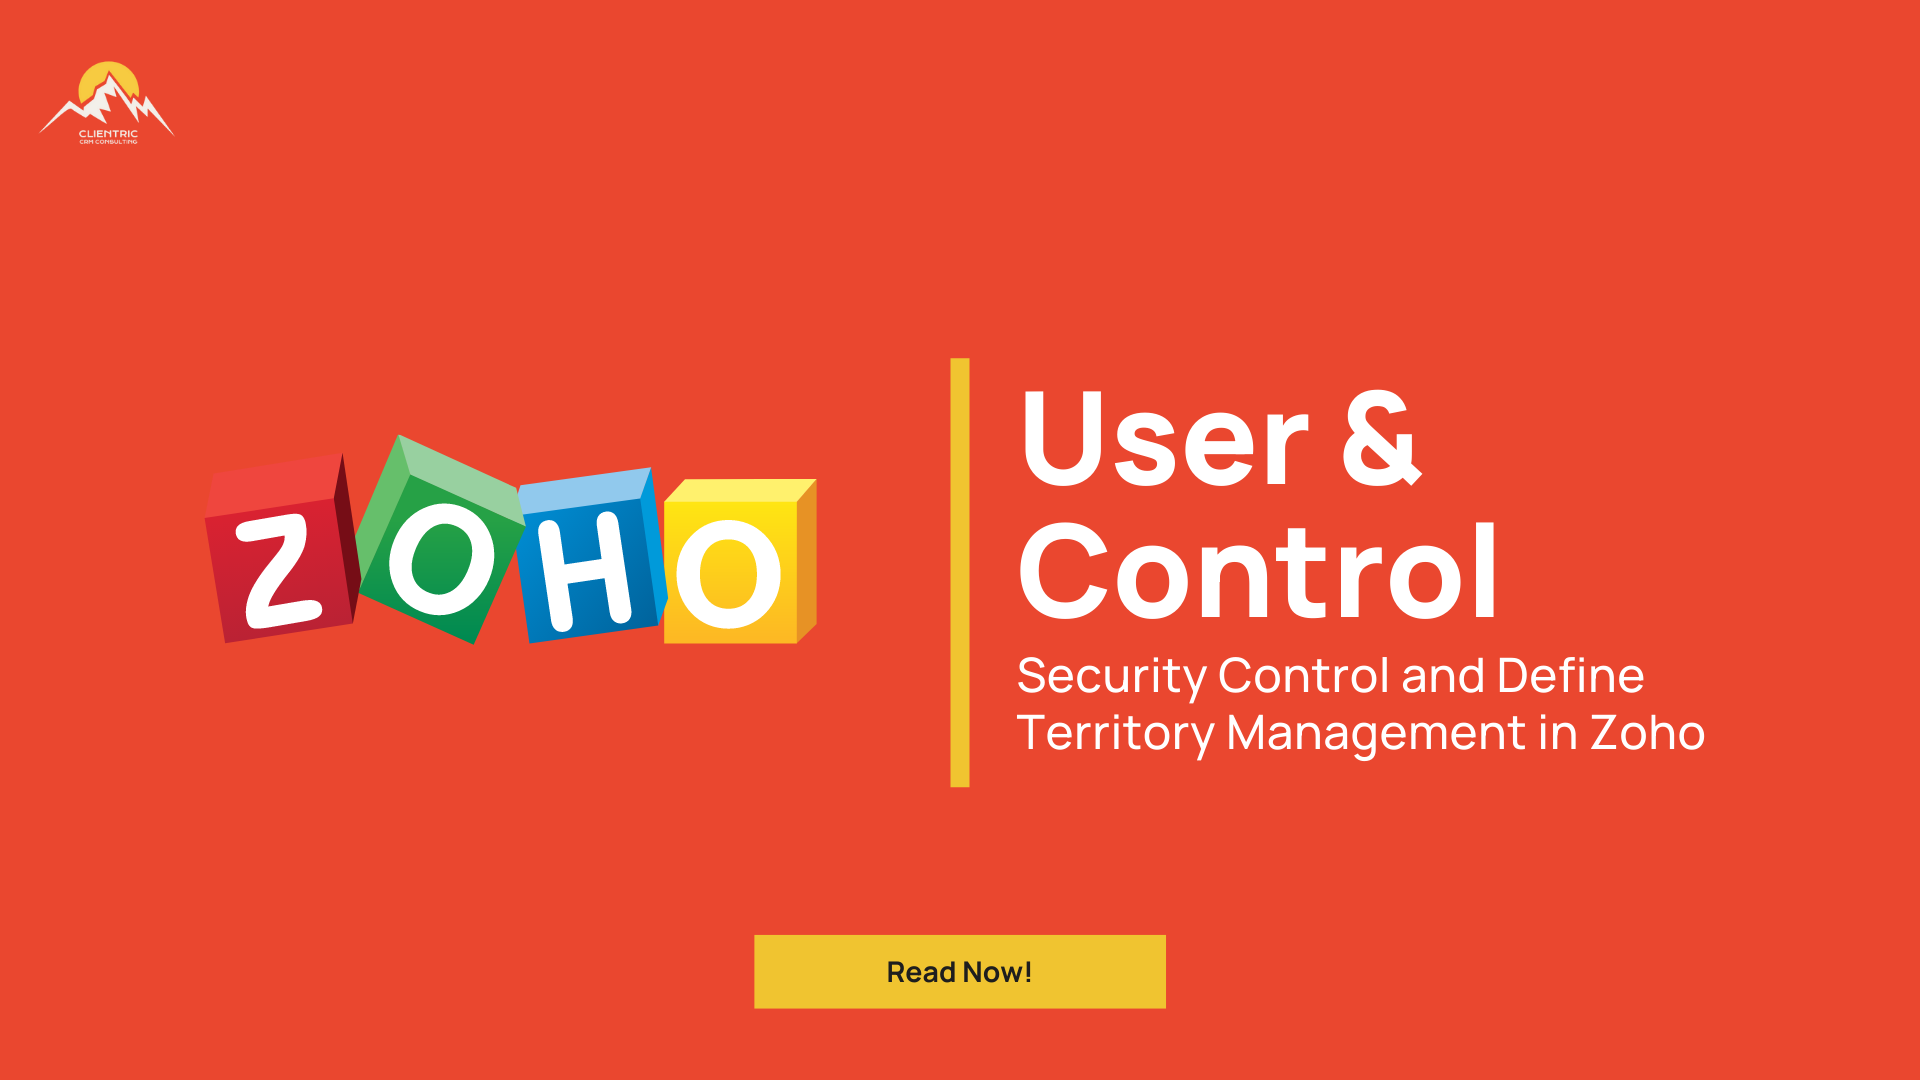 Zoho CRM: User and Control